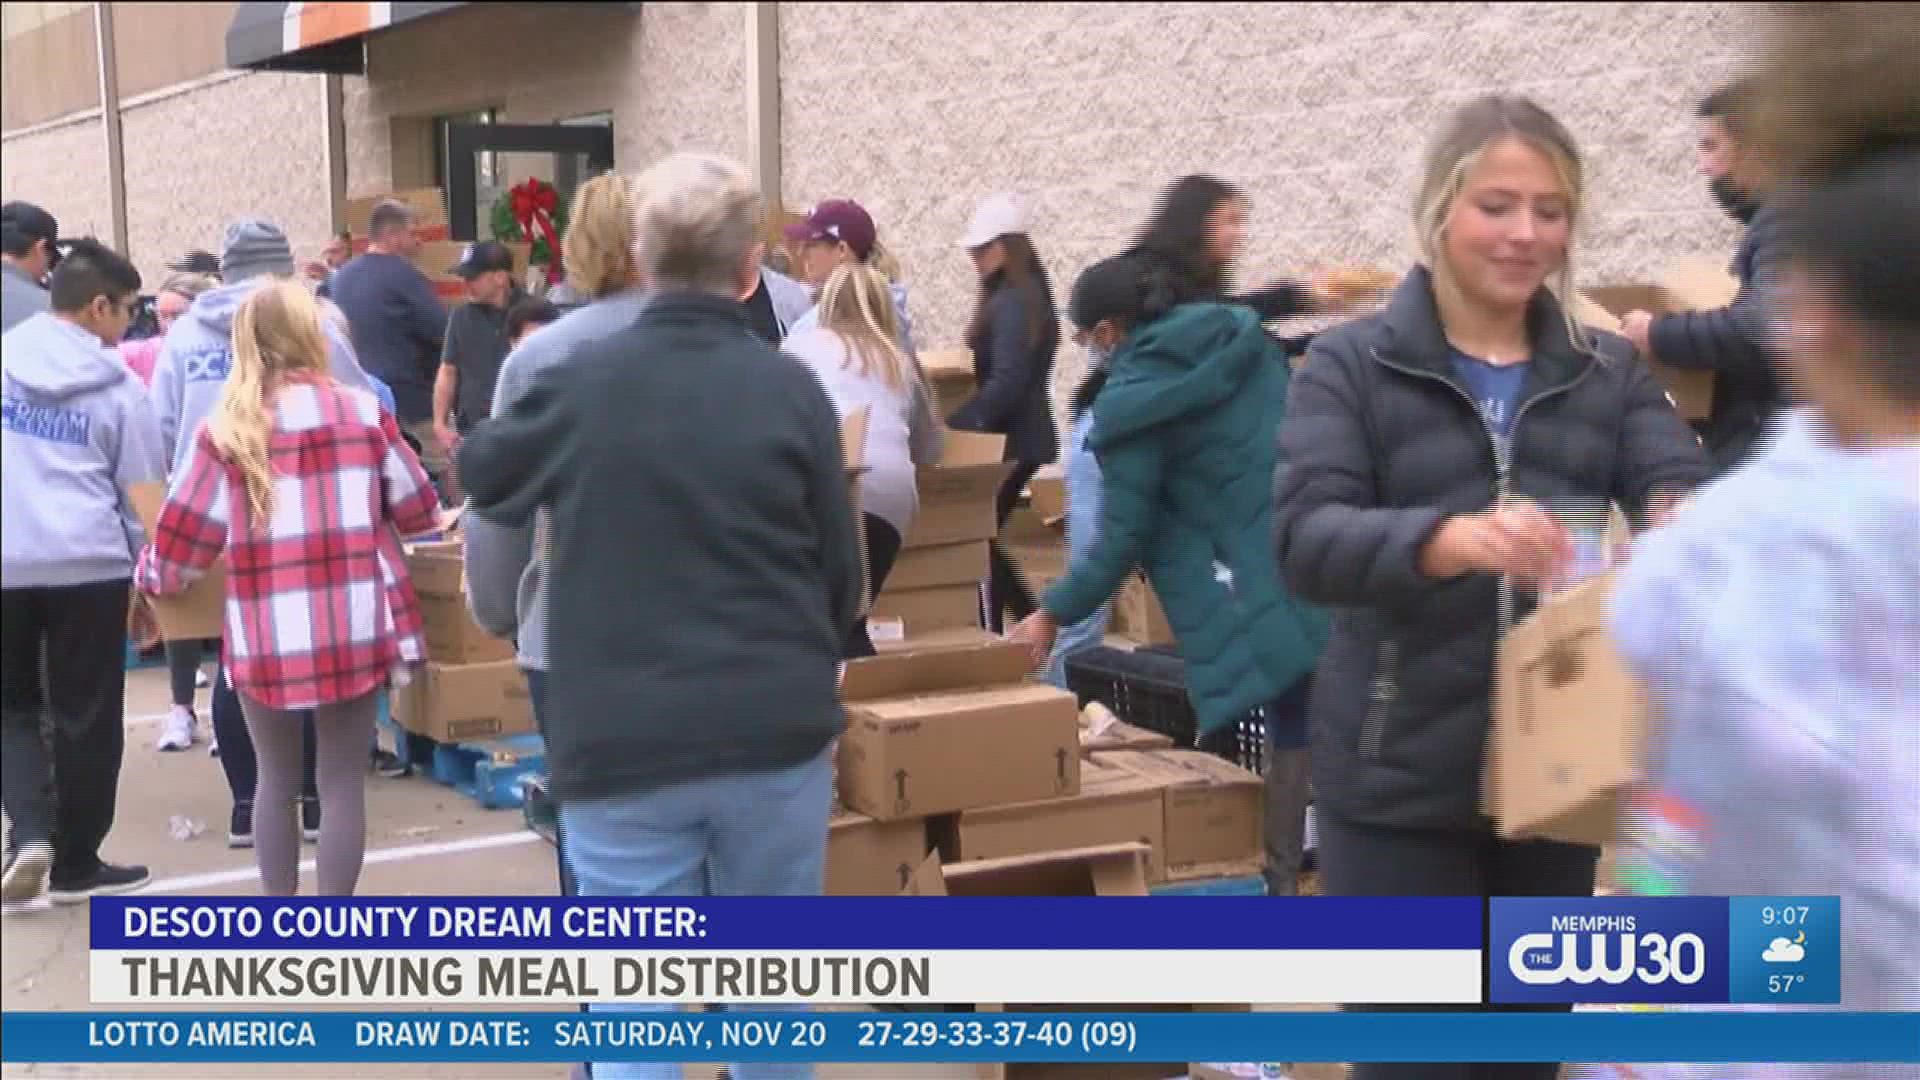 The Desoto County Dream Center gave away 200 Thanksgiving meals to families in need.